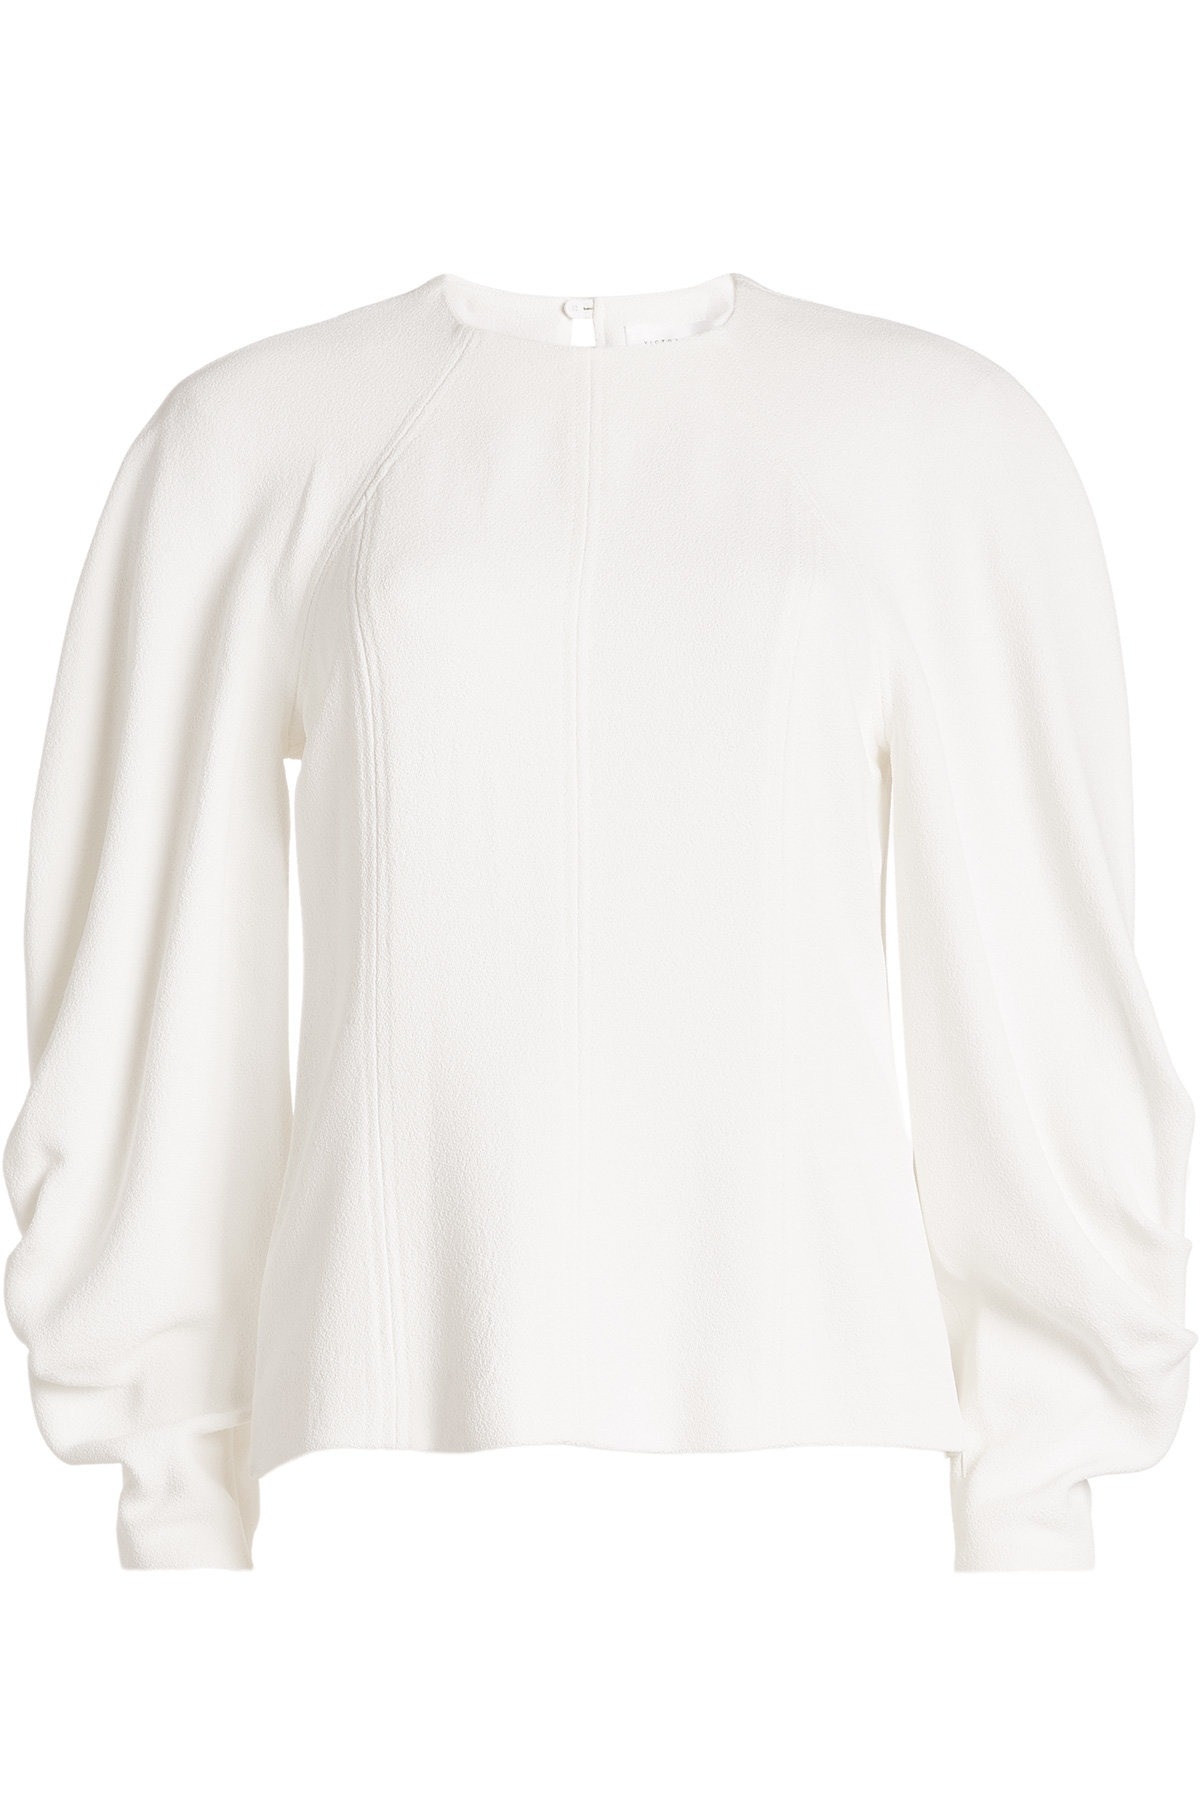 Victoria Beckham - Textured Top with Draped Sleeves